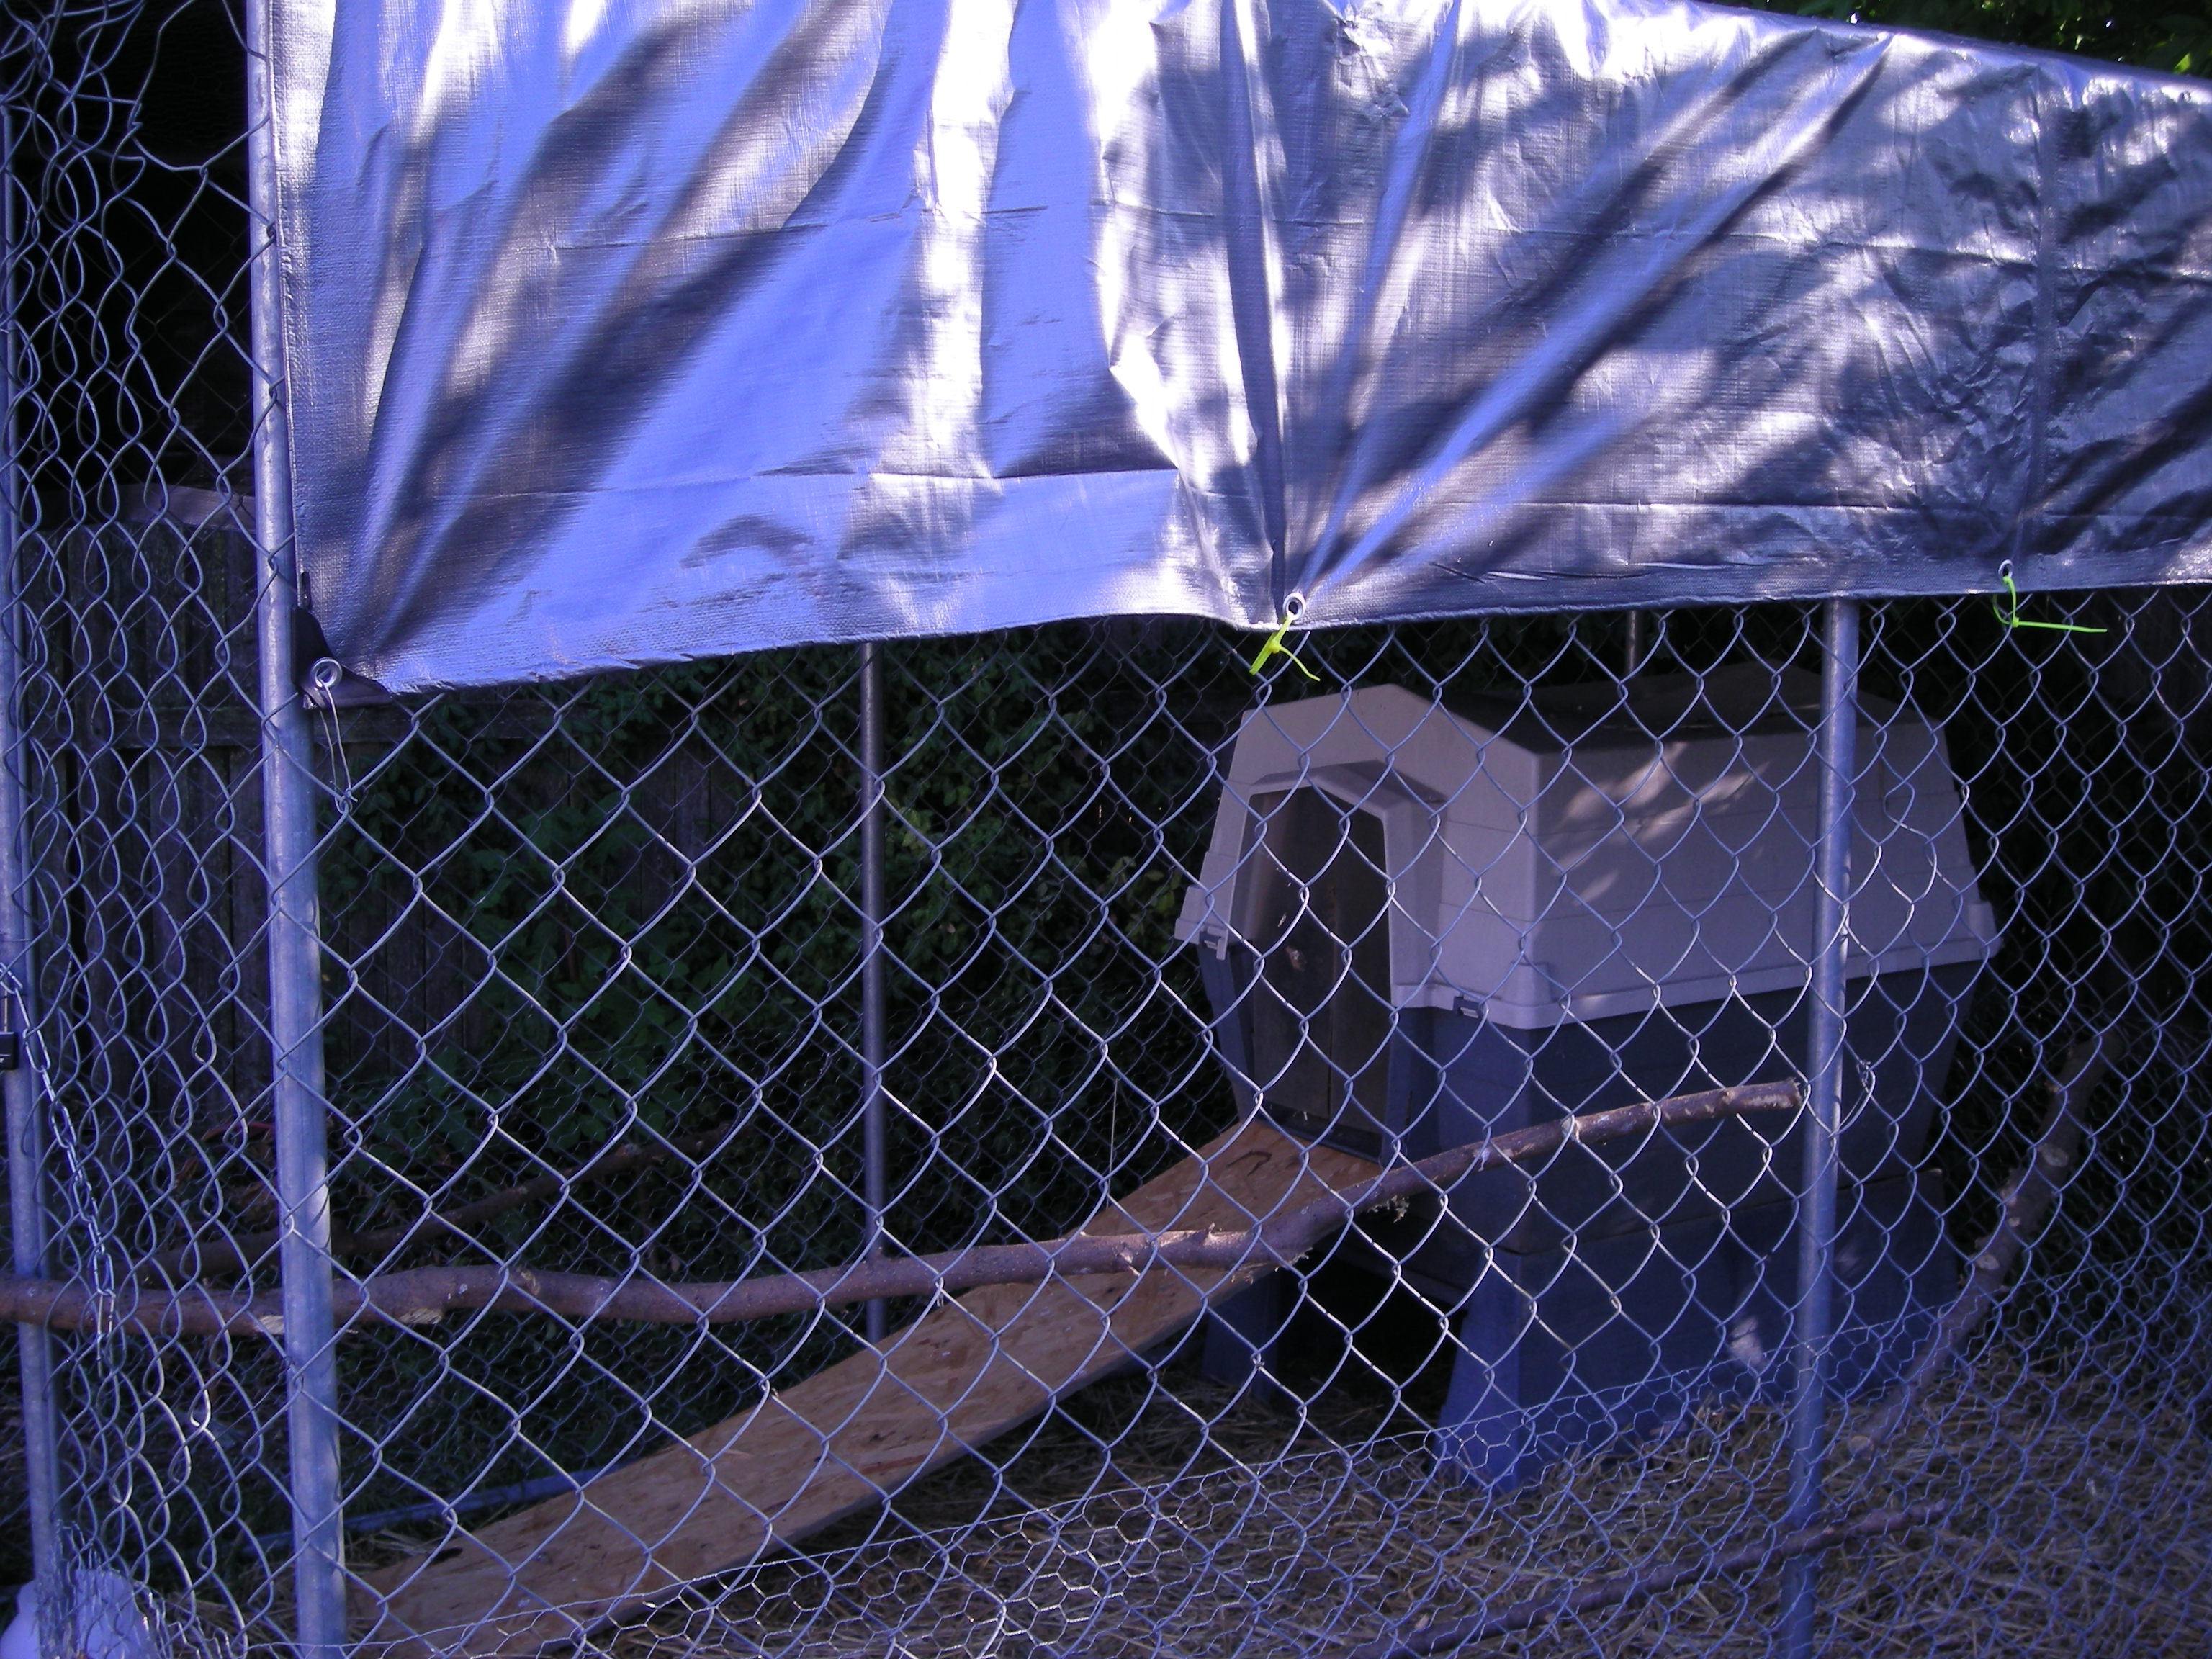 you can not tell but there are 3 branches set as perches and is covered by a tarp. they run the yard most of the time but for their safety we lock the gate to the 6X10 kennel at night or when will be gone most of the day.